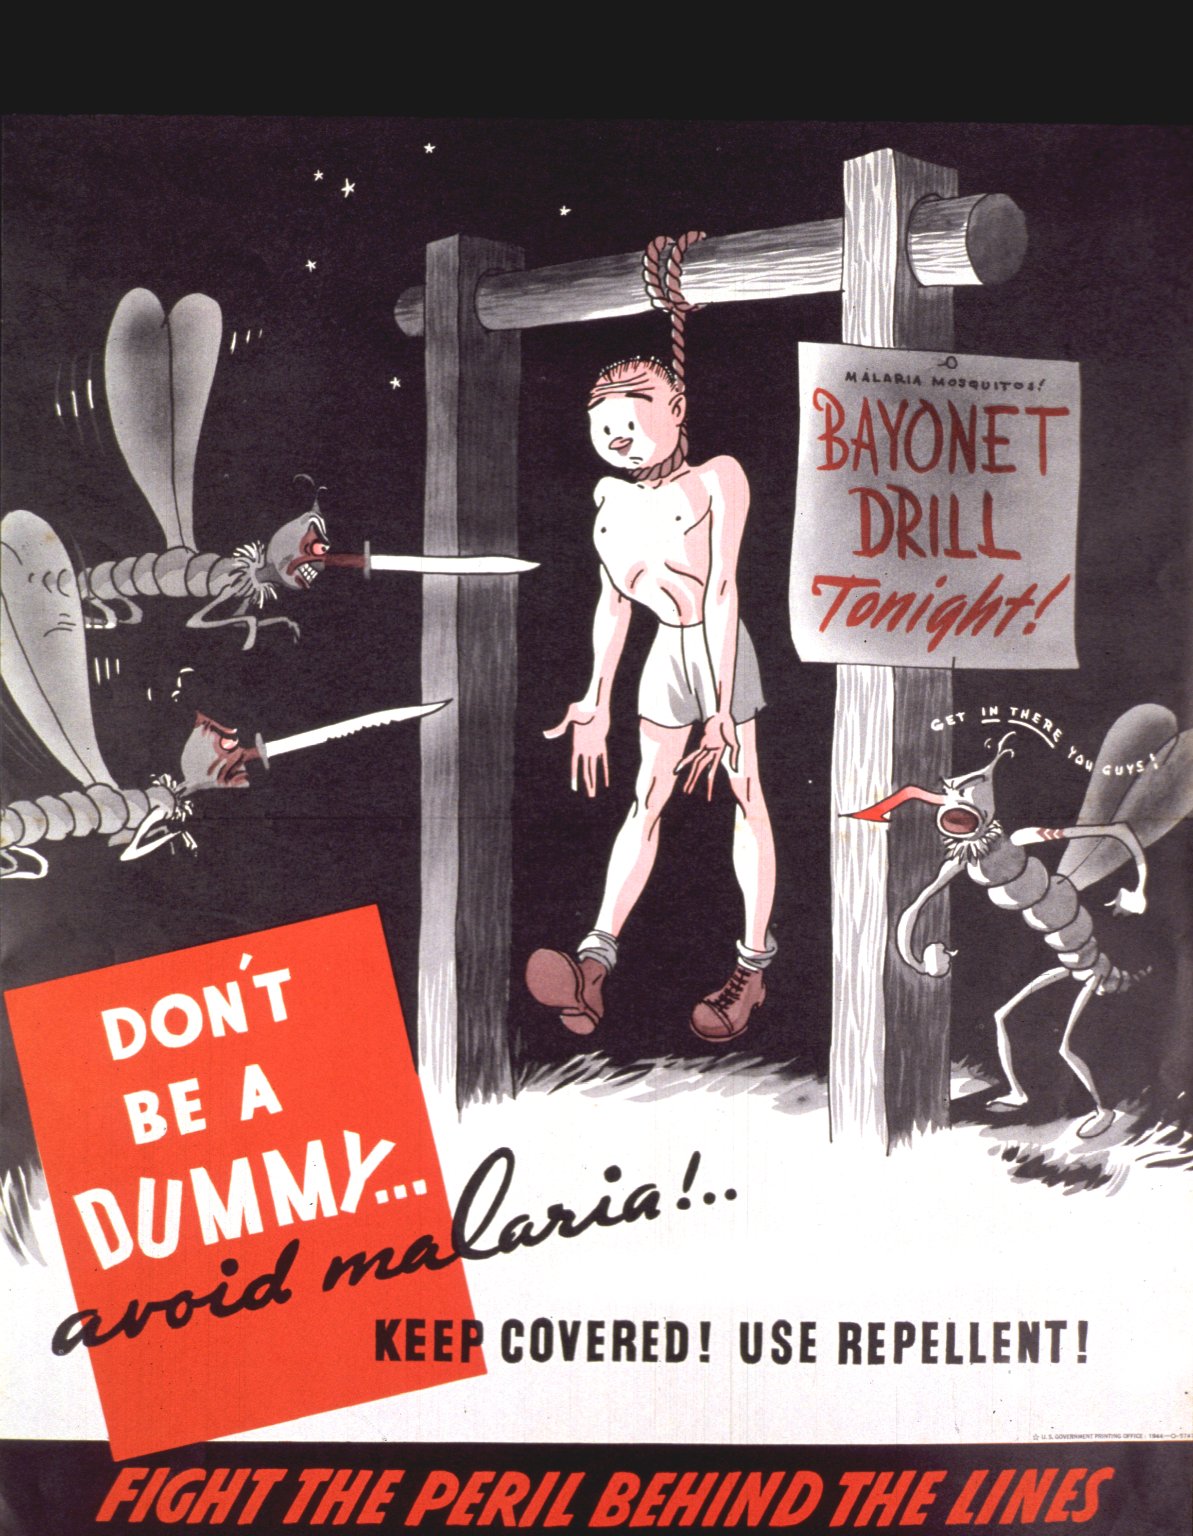 World War II-era health campaigns often used military metaphors to depict mosquitoes